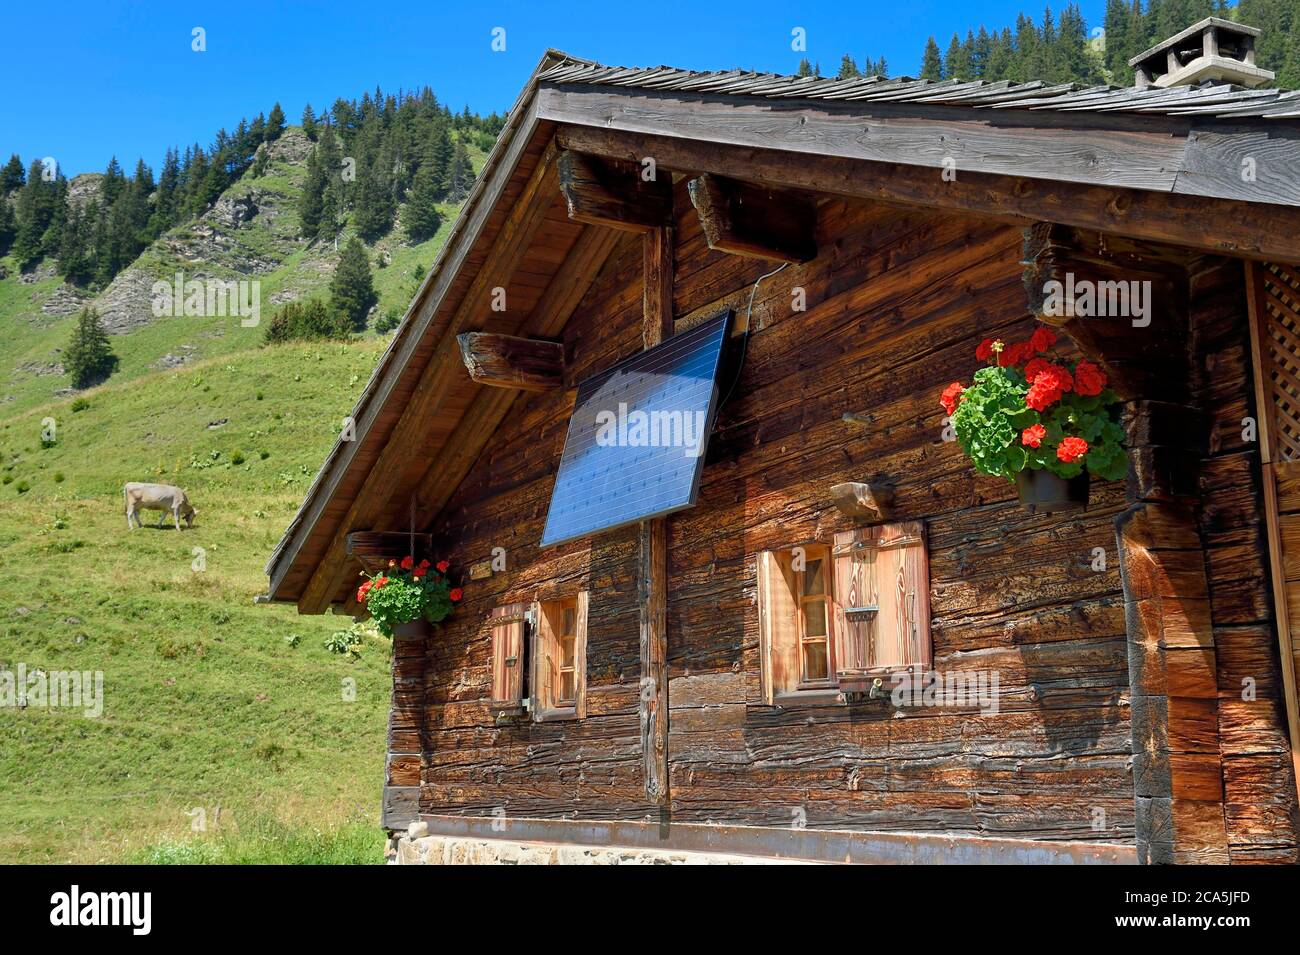 Switzerland, Canton of Vaud, Villars-sur-Ollon, hike from the Bretaye pass to the Croix pass passing through the hamlet of Ensex, chalet with photovoltaic solar panel in the hamlet of Ensex Stock Photo